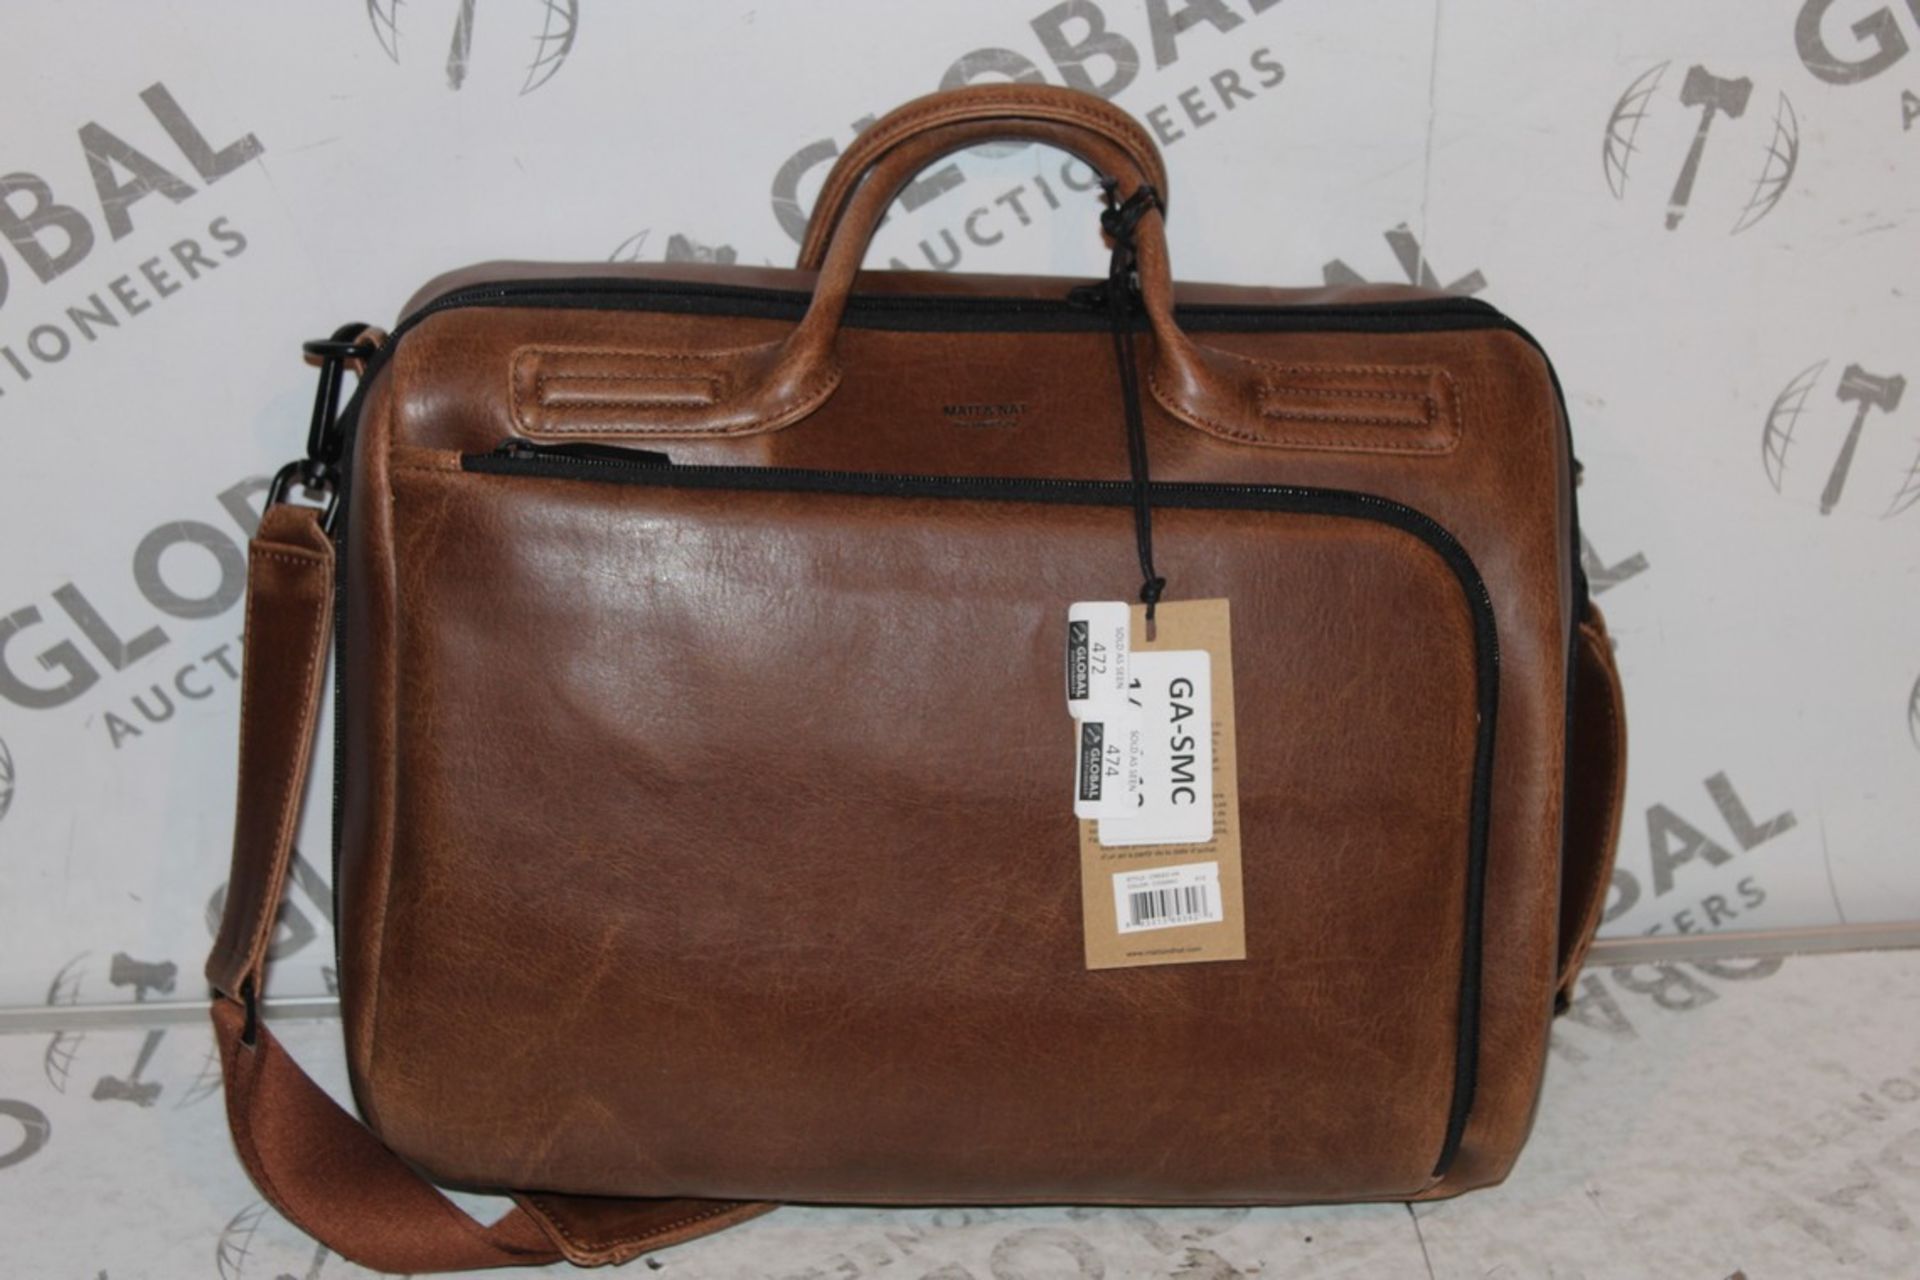 Brand New with Tags Mat and Nat Creed-VN Brown Leather Shoulder Laptop Bag RRP £50